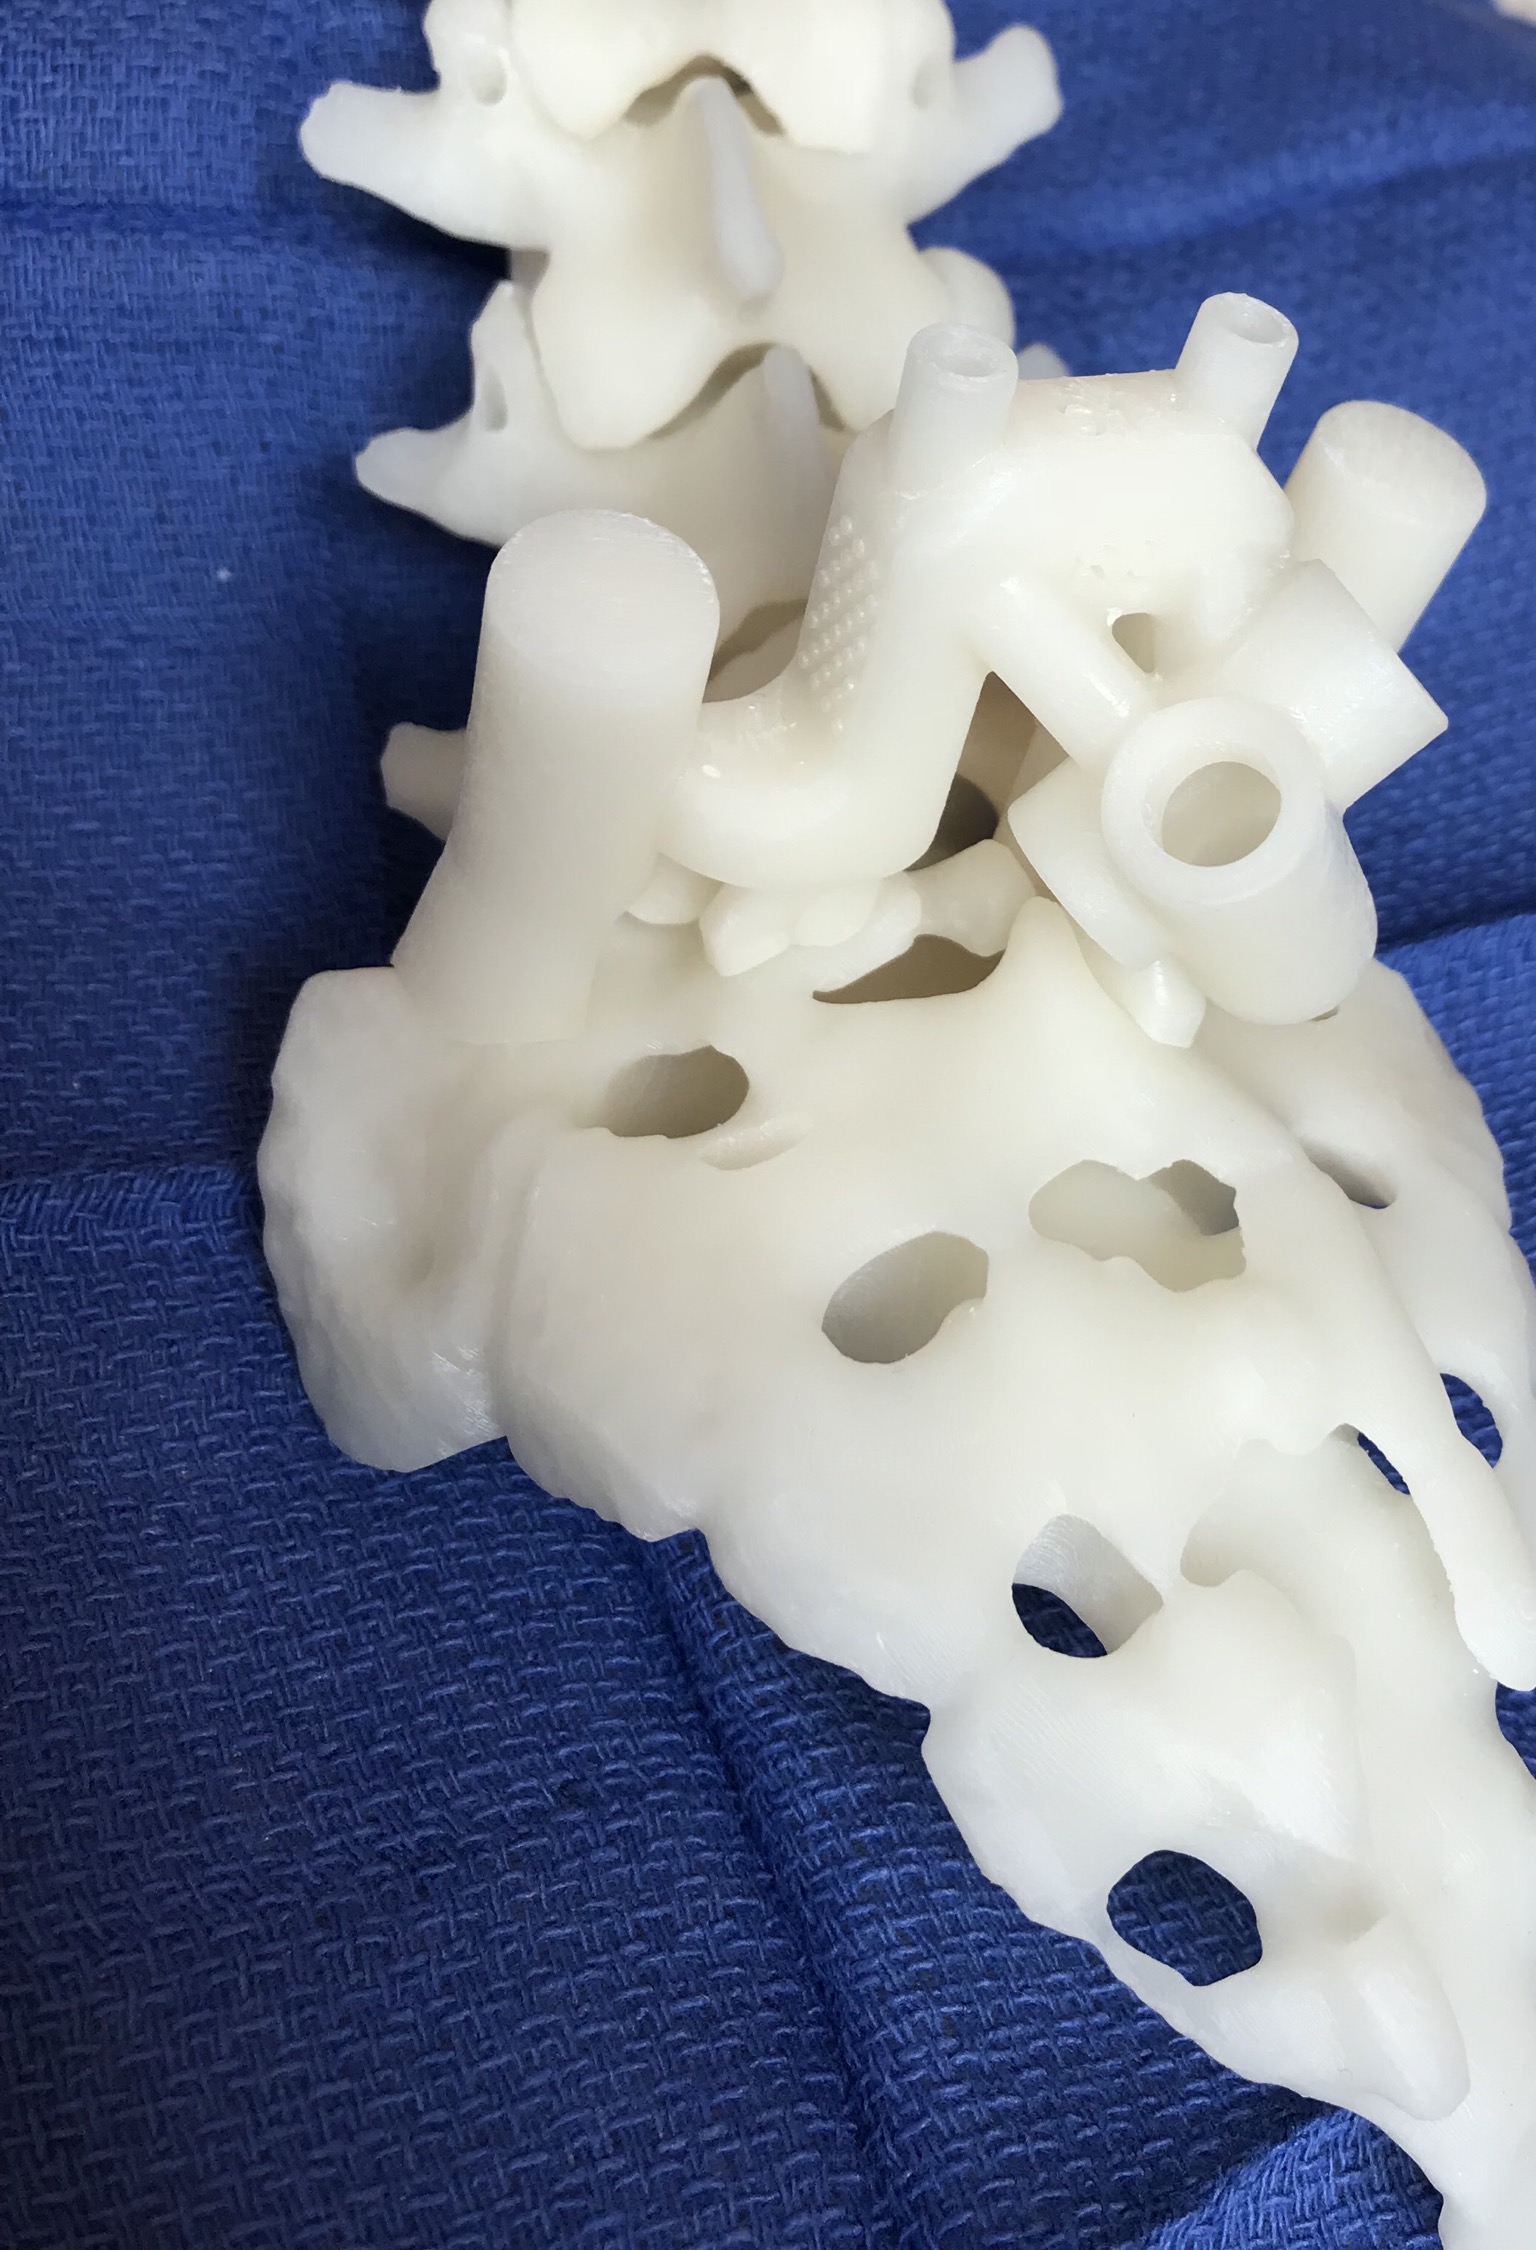 3D printed anatomic model of the patient’s spine with pelvic guide in place